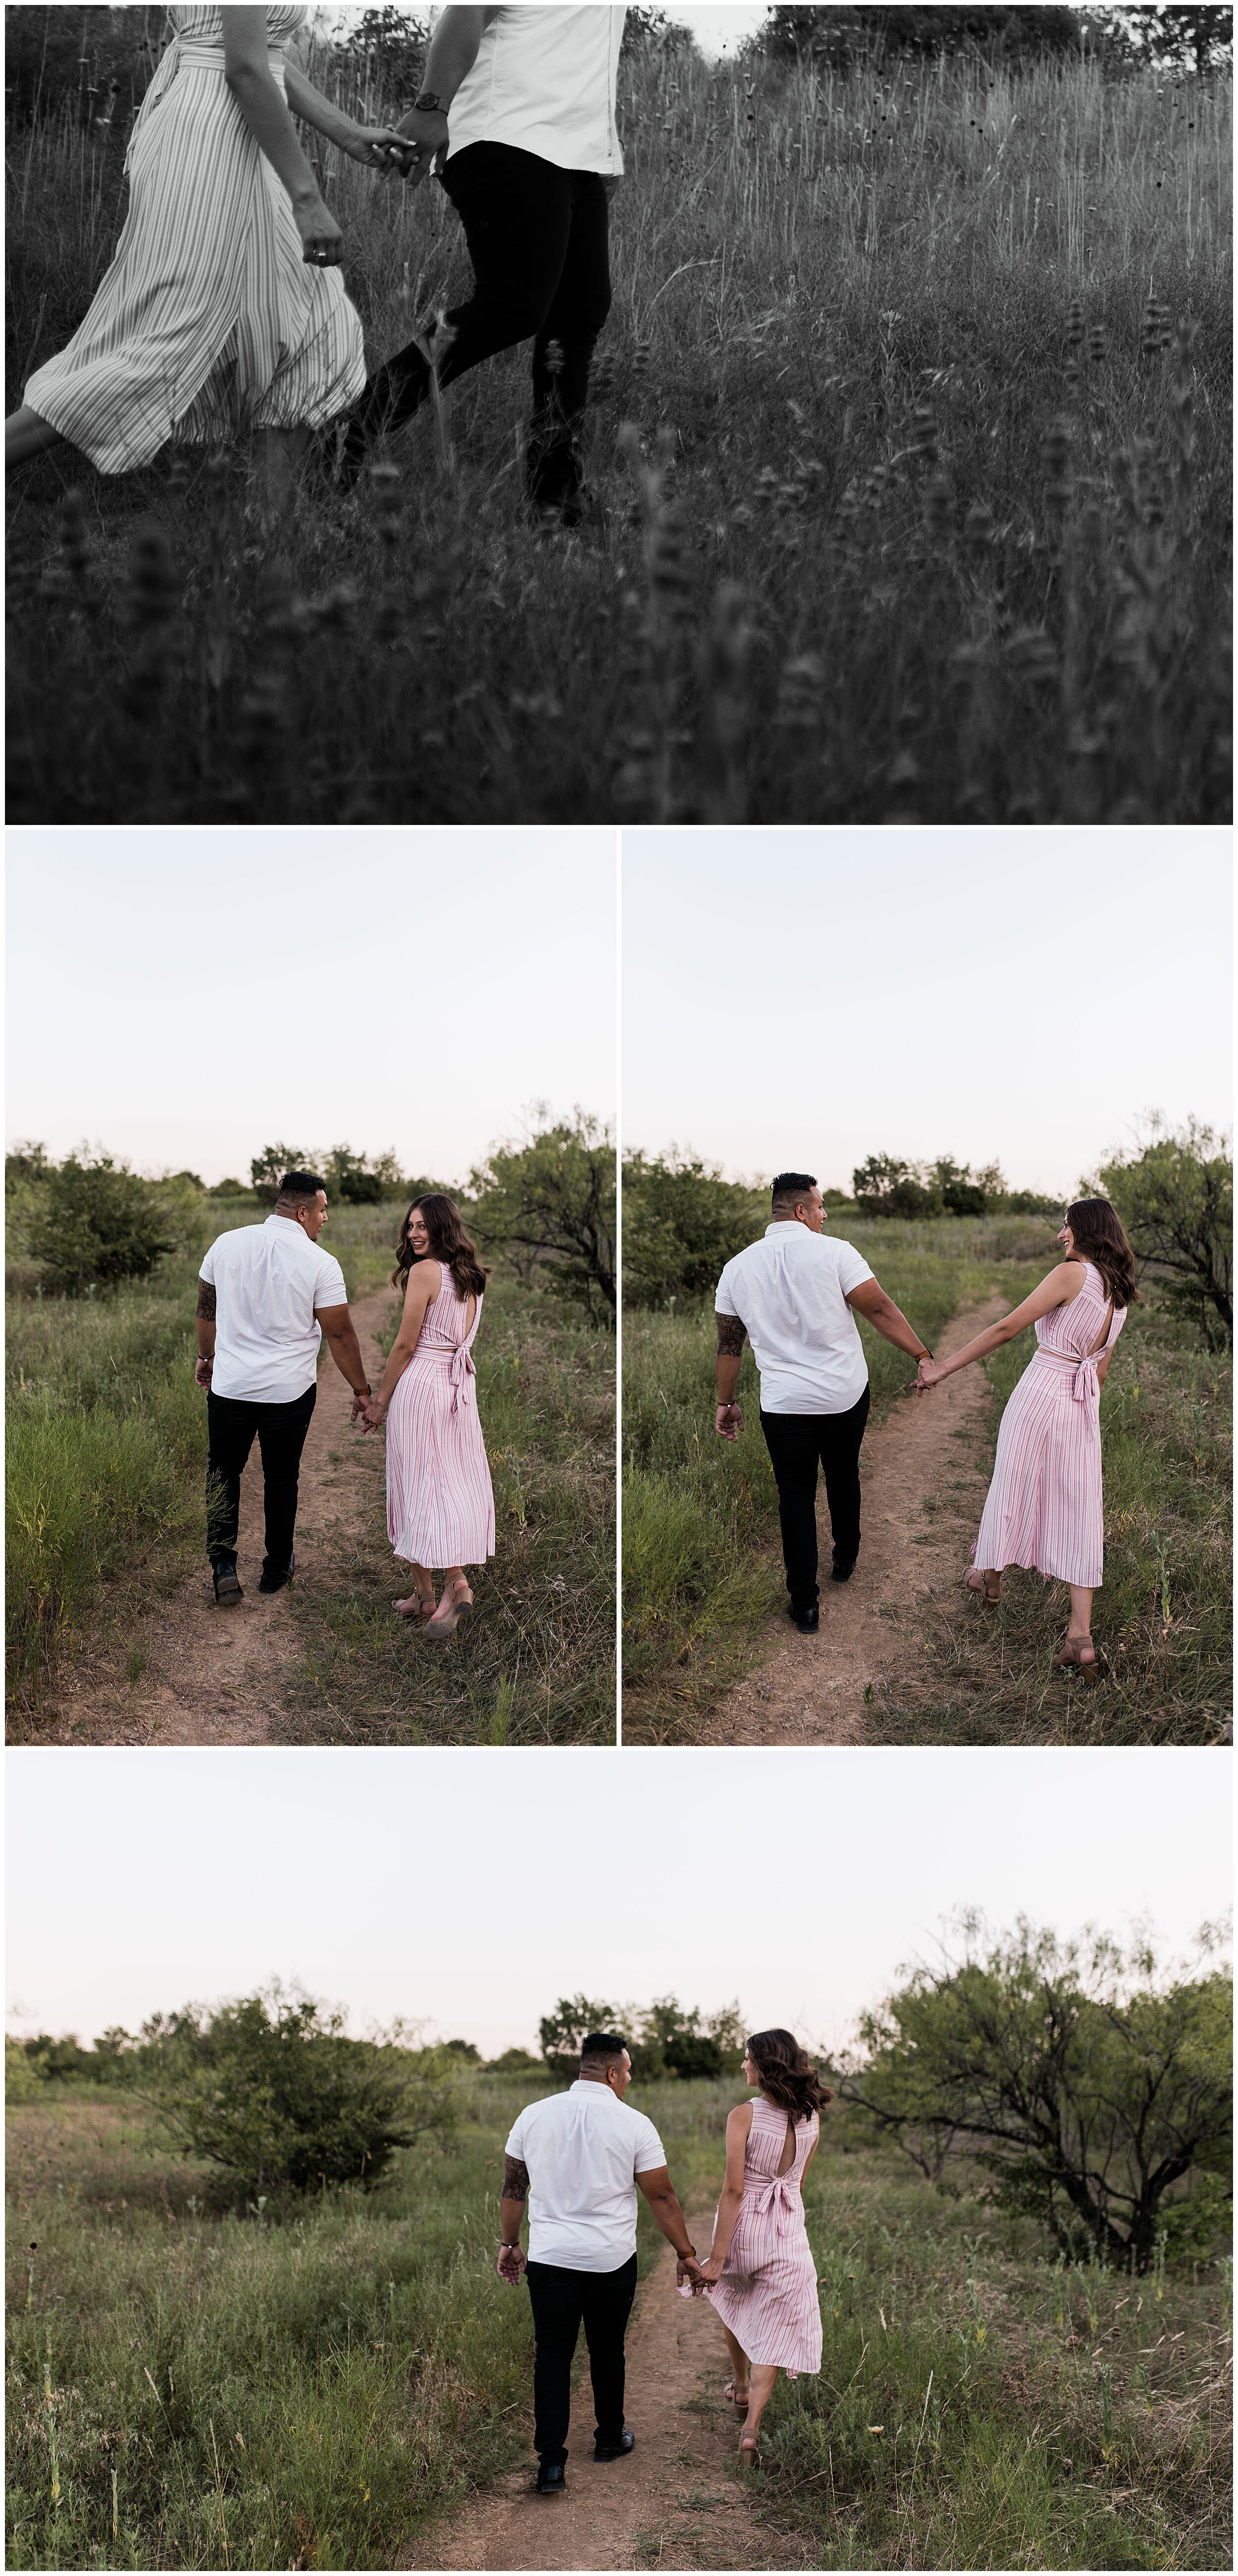  Fort Worth engagement session | Magnolia Avenue engagement session | Fort Worth engagement photographer | www.jordanmitchellphotography.com 